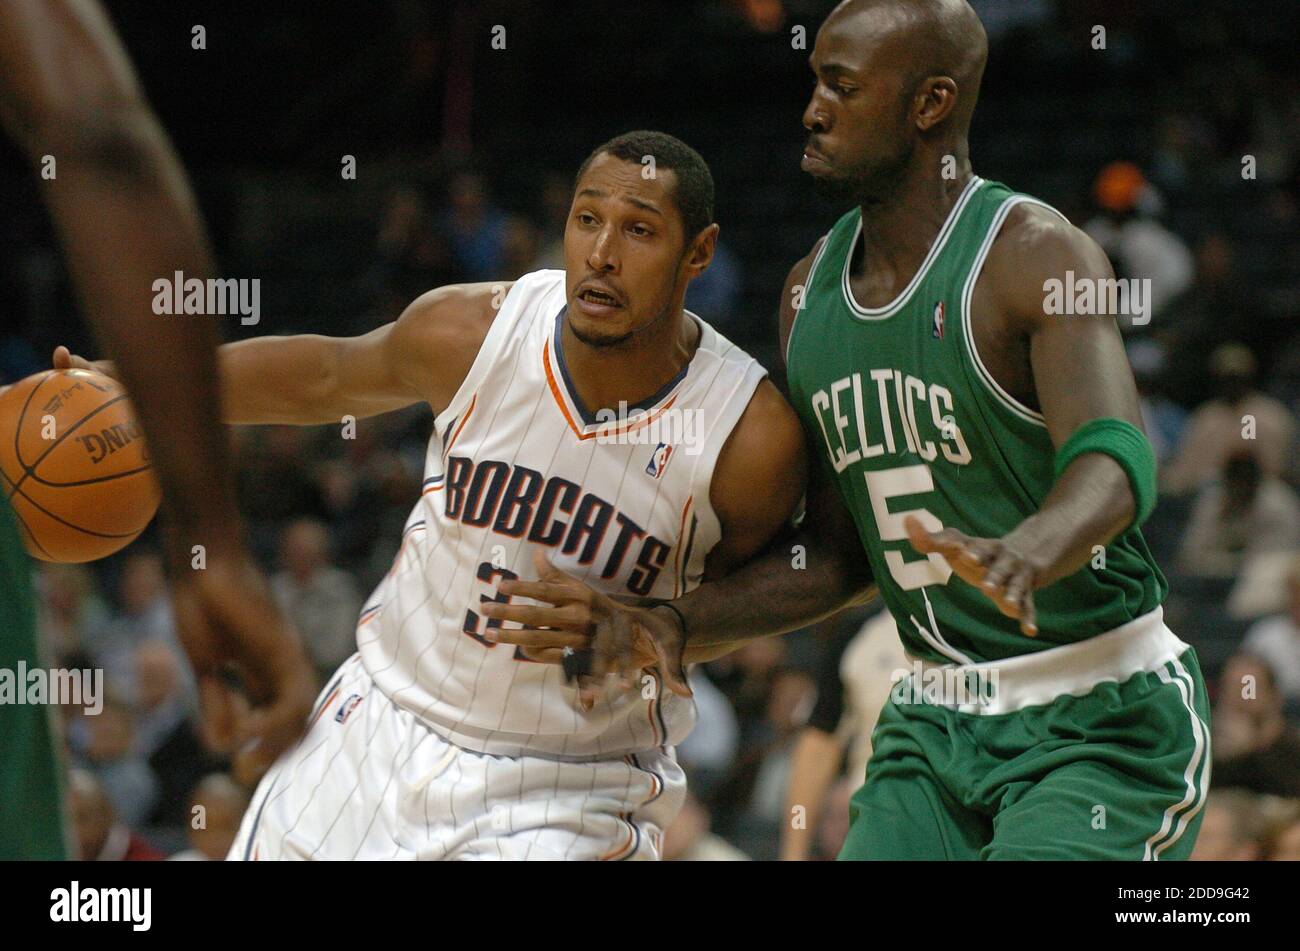 NO FILM, NO VIDEO, NO TV, NO DOCUMENTARY - Charlotte Bobcats' Boris Diaw (32) drives the ball down court as Boston Celtics' Kevin Garnett defends on the play in Charlotte, NC, USA on December 1, 2009. Photo by T. Ortega Gaines/Charlotte Observer/MCT/Cameleon/ABACAPRESS.COM Stock Photo